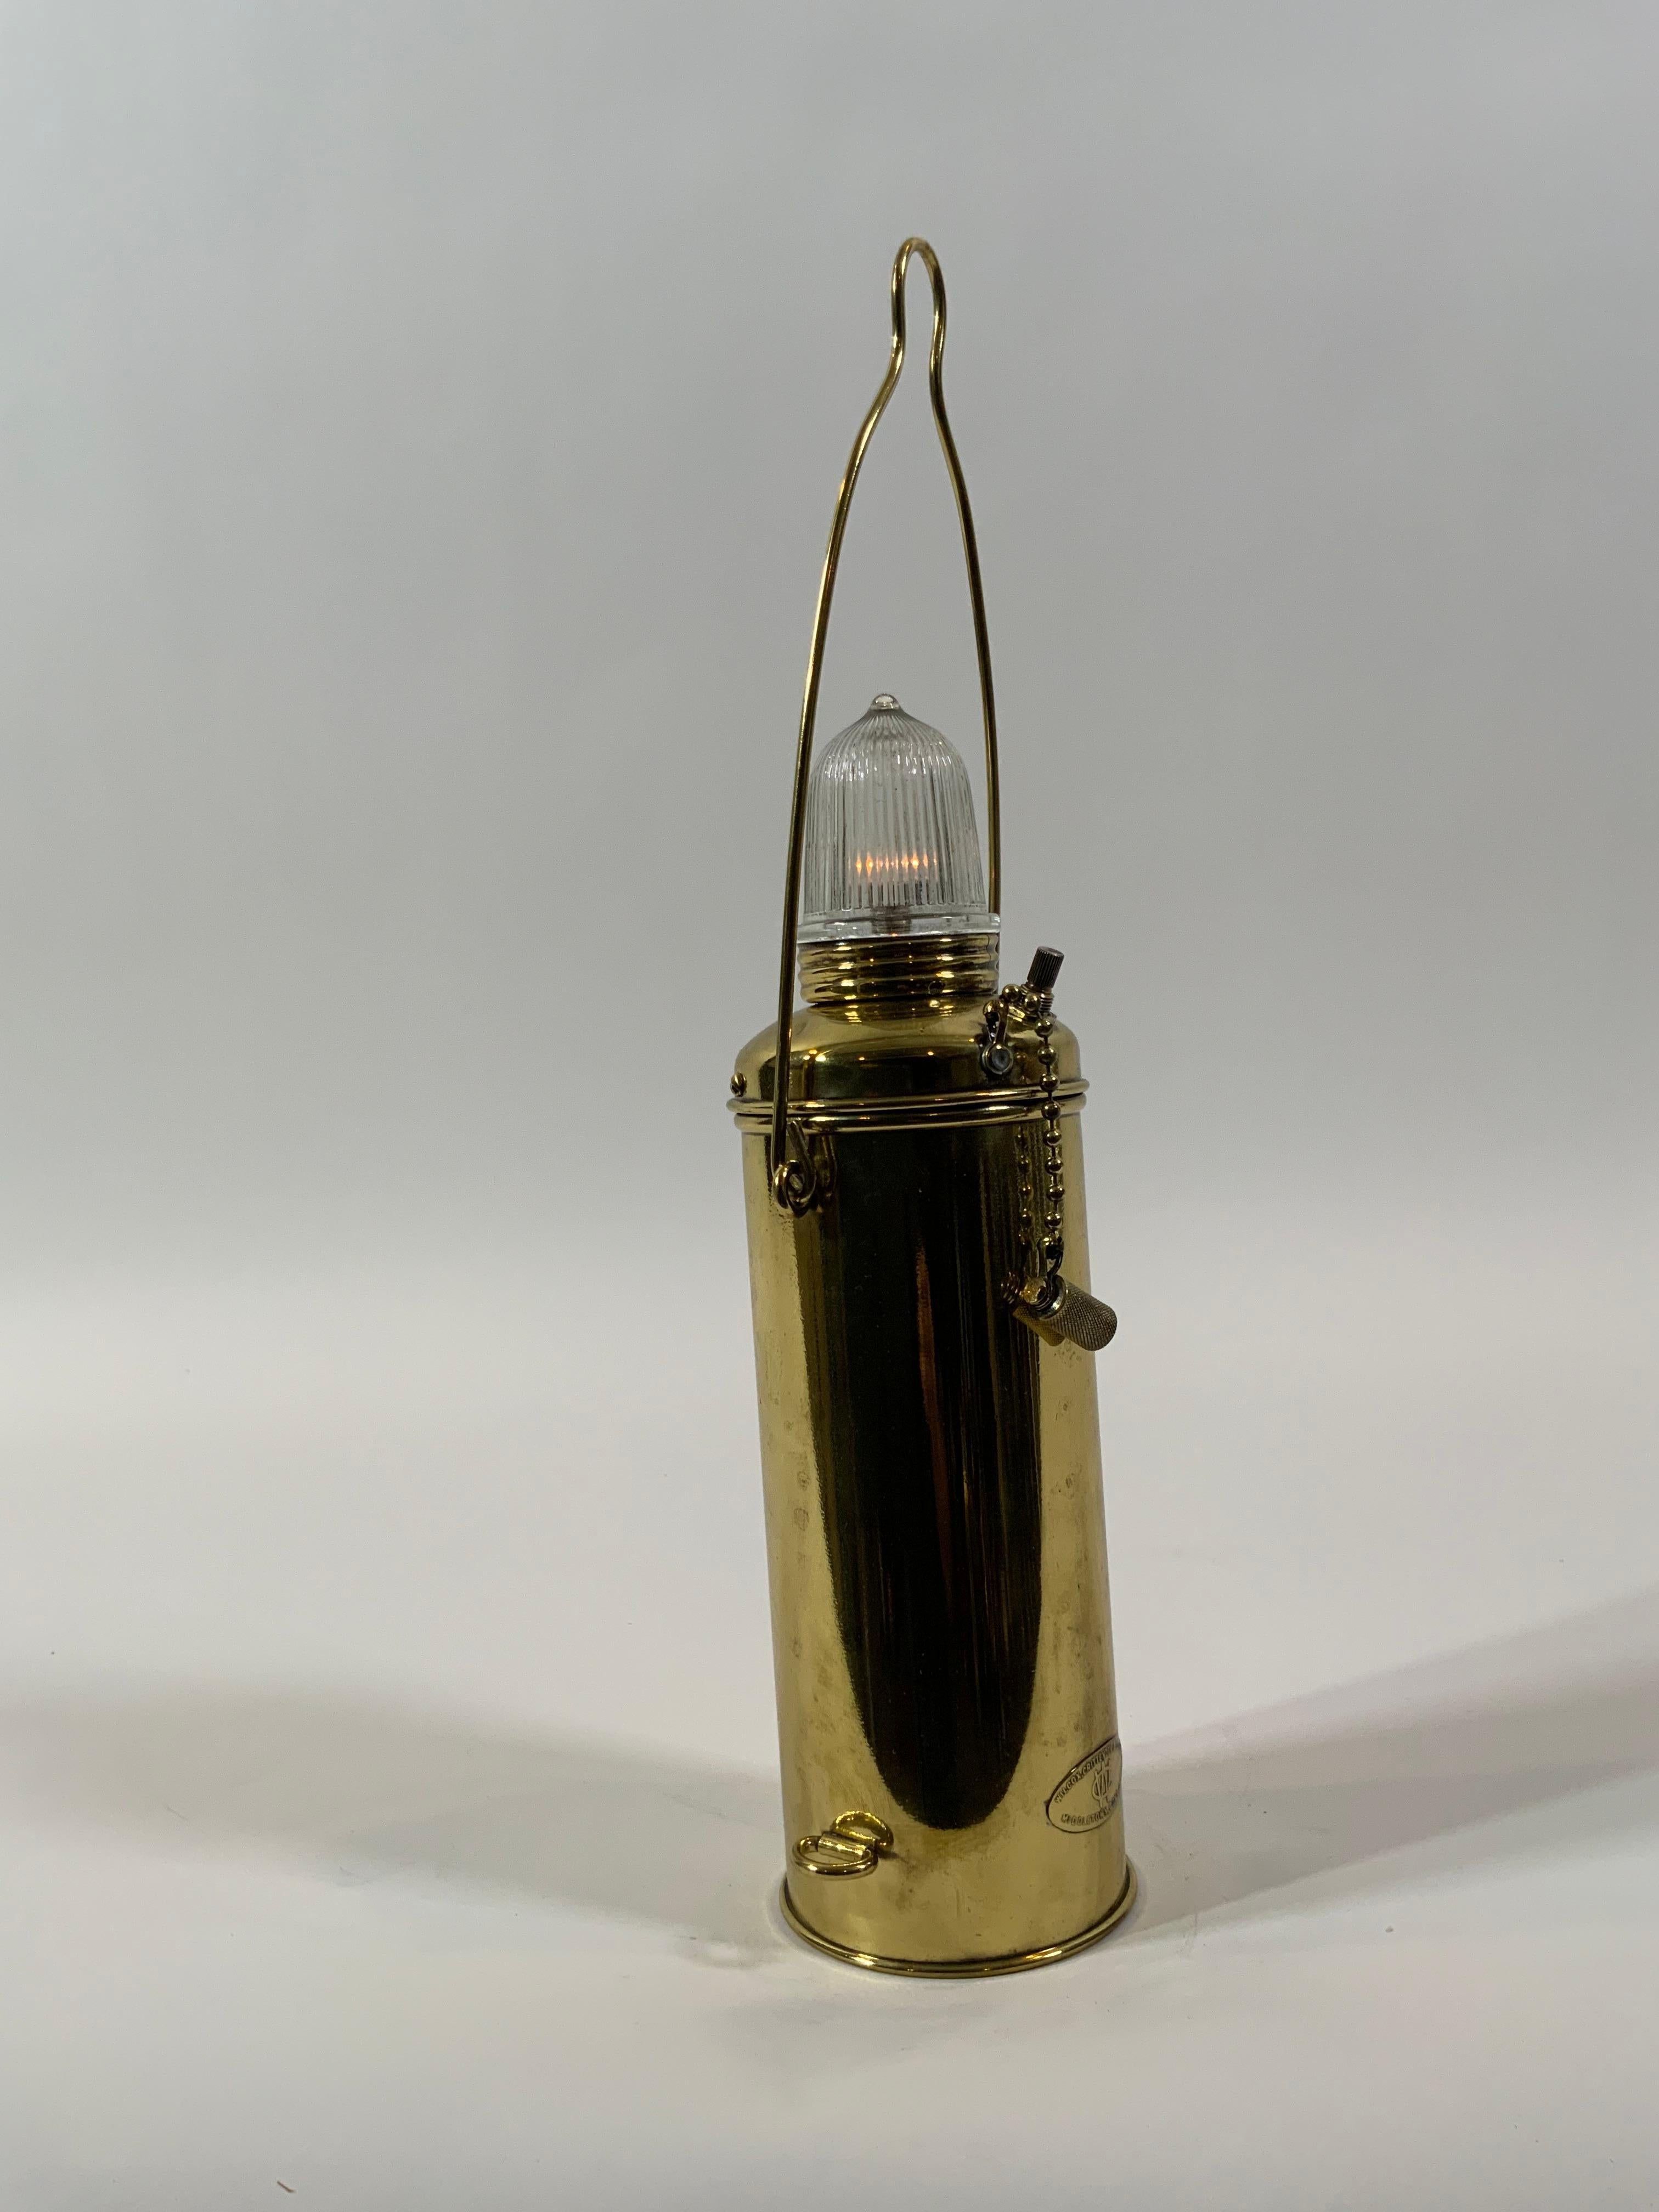 Brass Nautical Distress Lantern In Good Condition For Sale In Norwell, MA